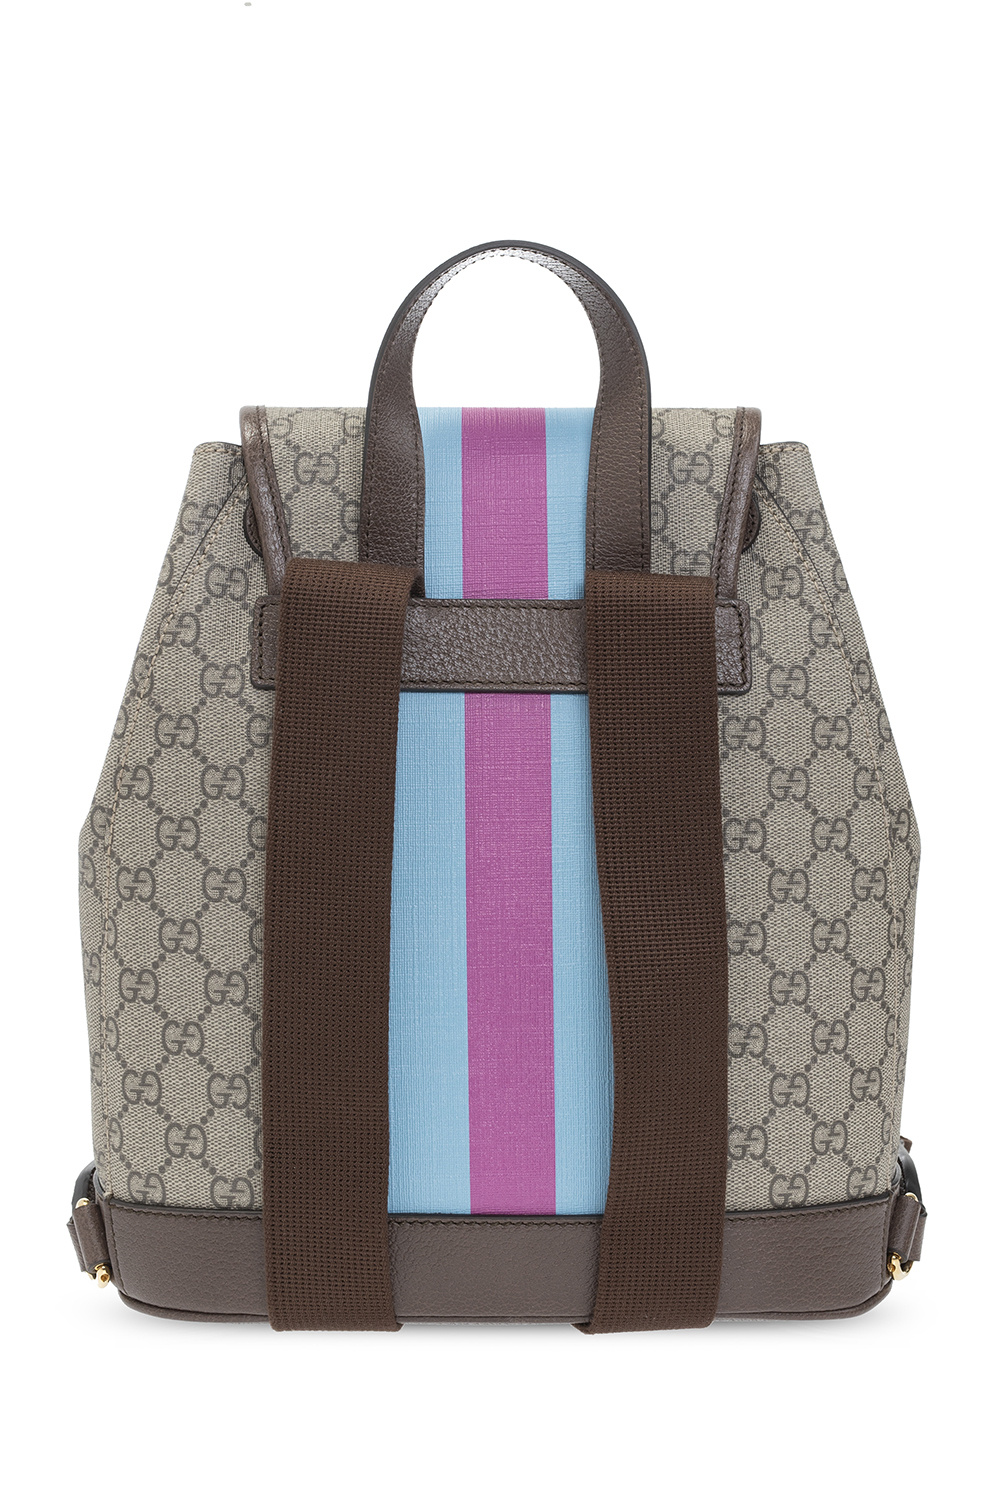 Gucci GG Supreme canvas backpack